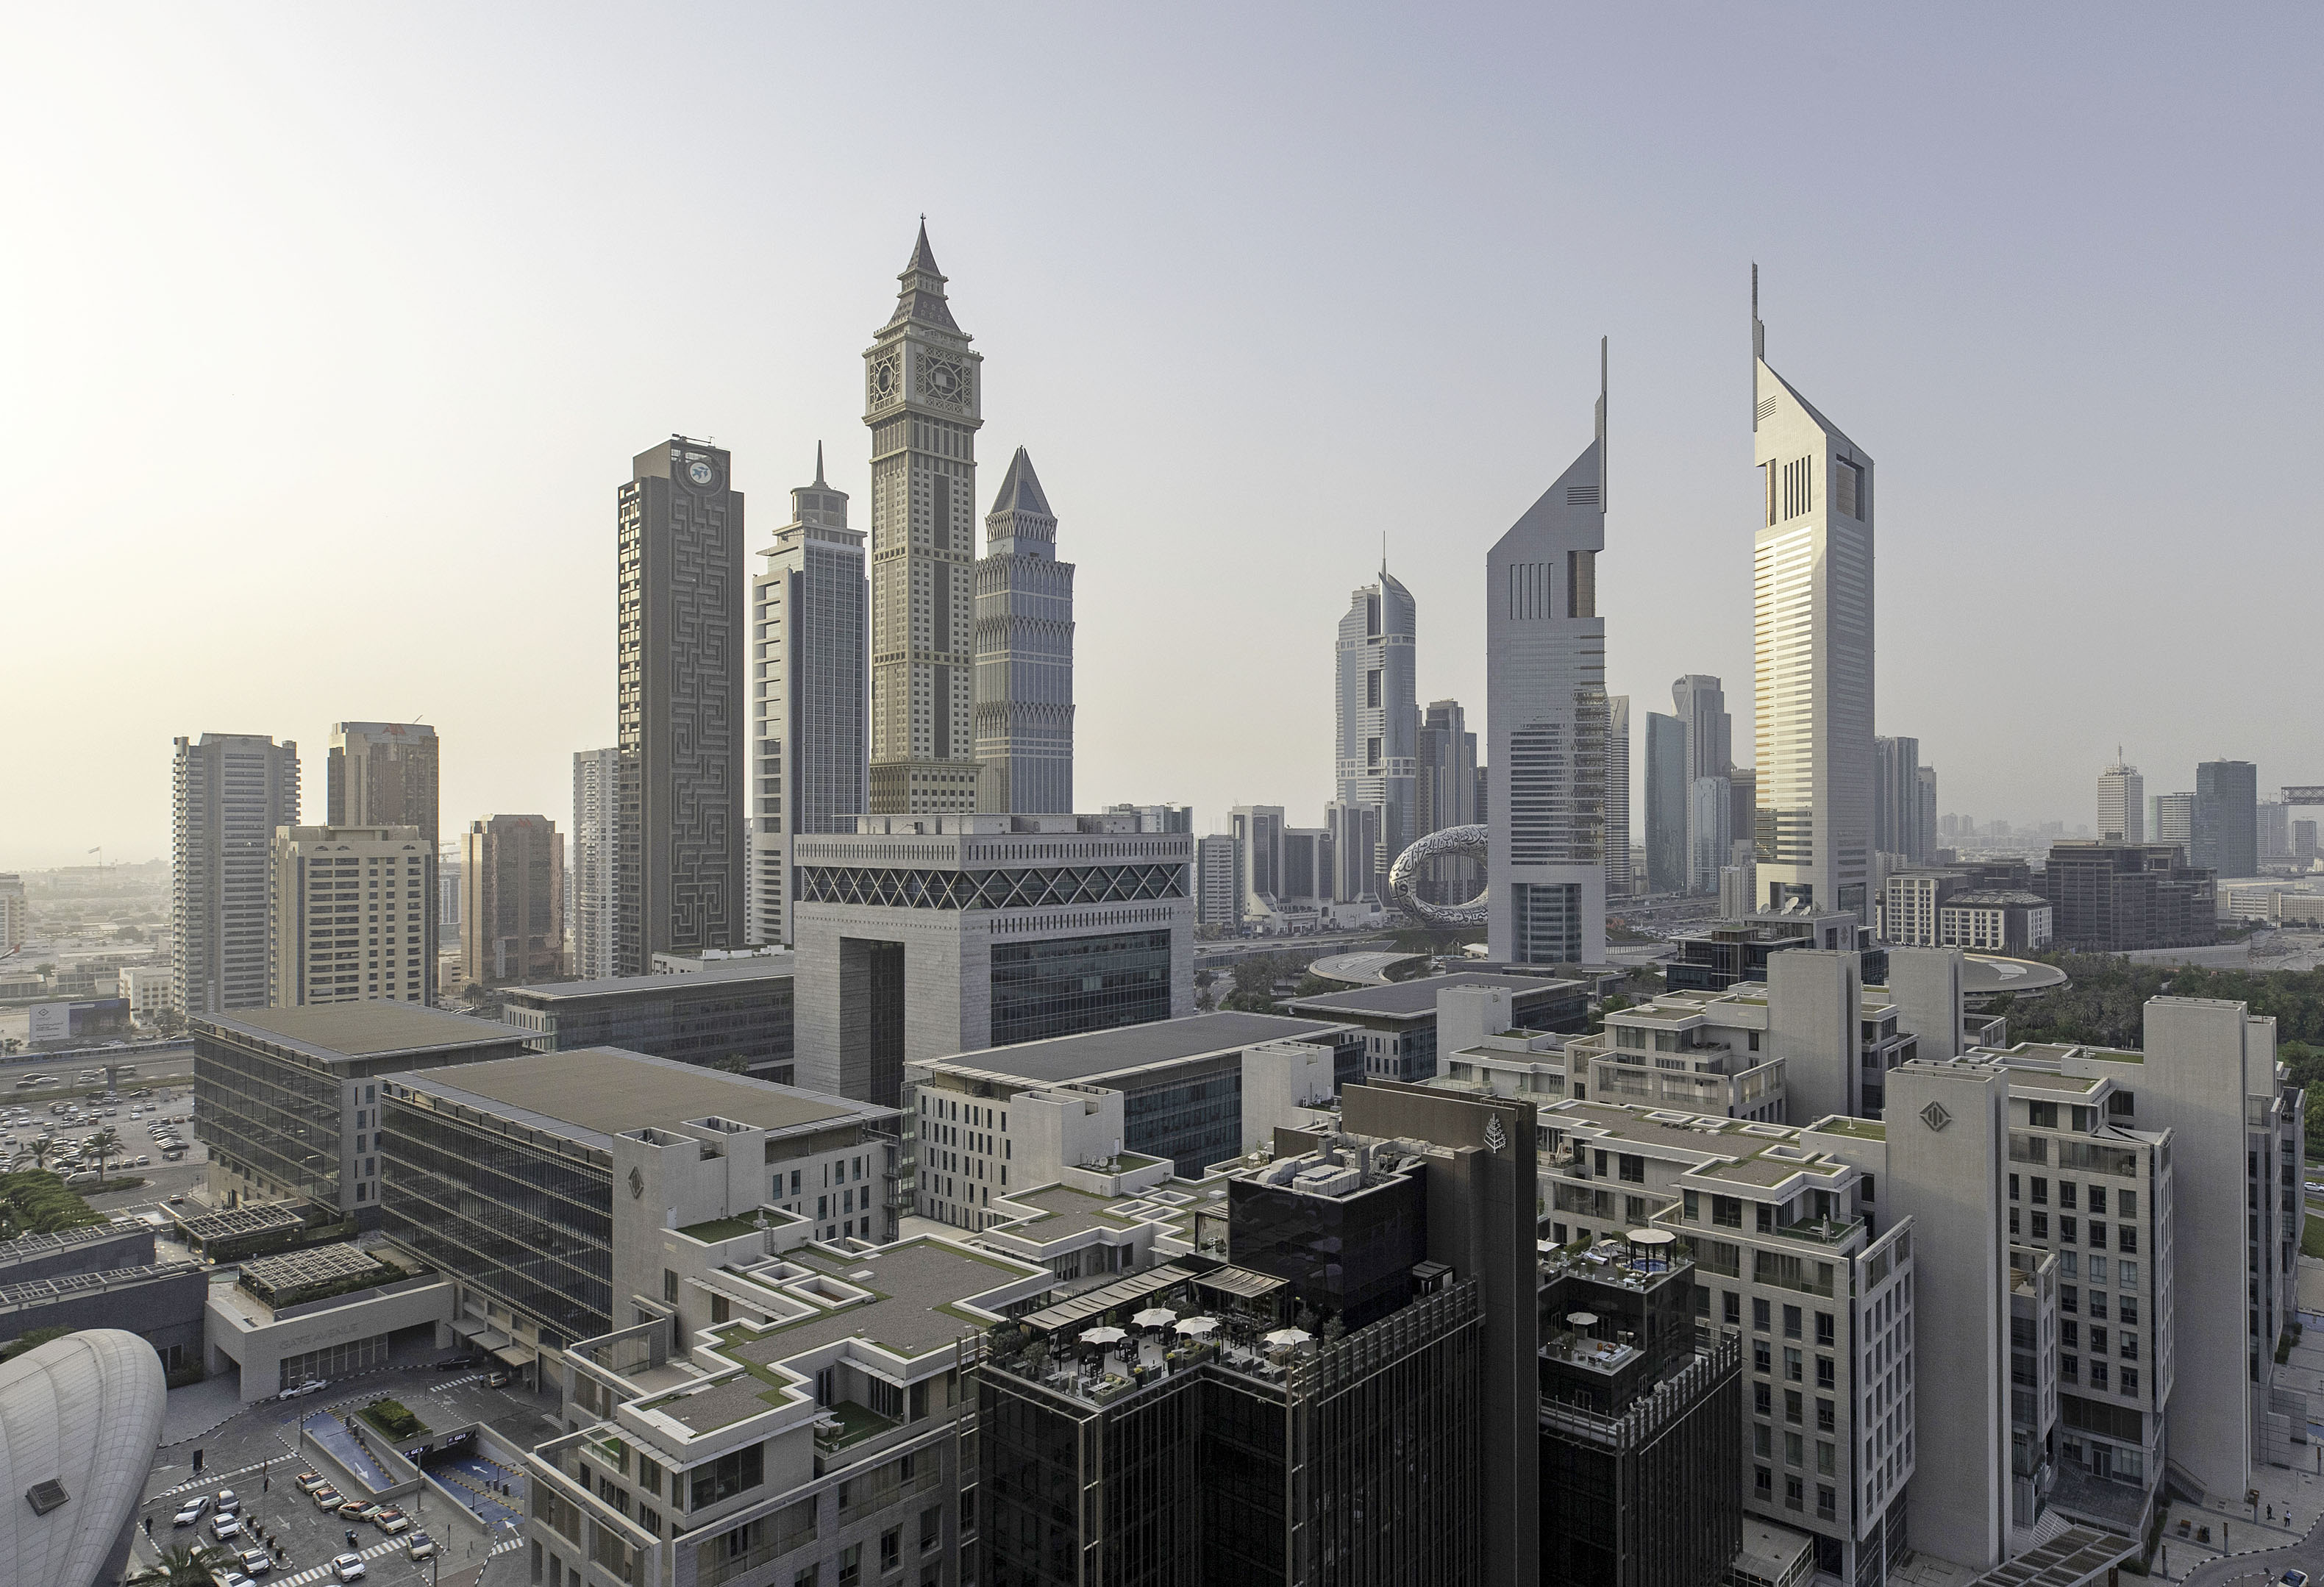 The Gate building, center left, in the&nbsp;Dubai International Financial Center, where Credit Suisse has offices.&nbsp;